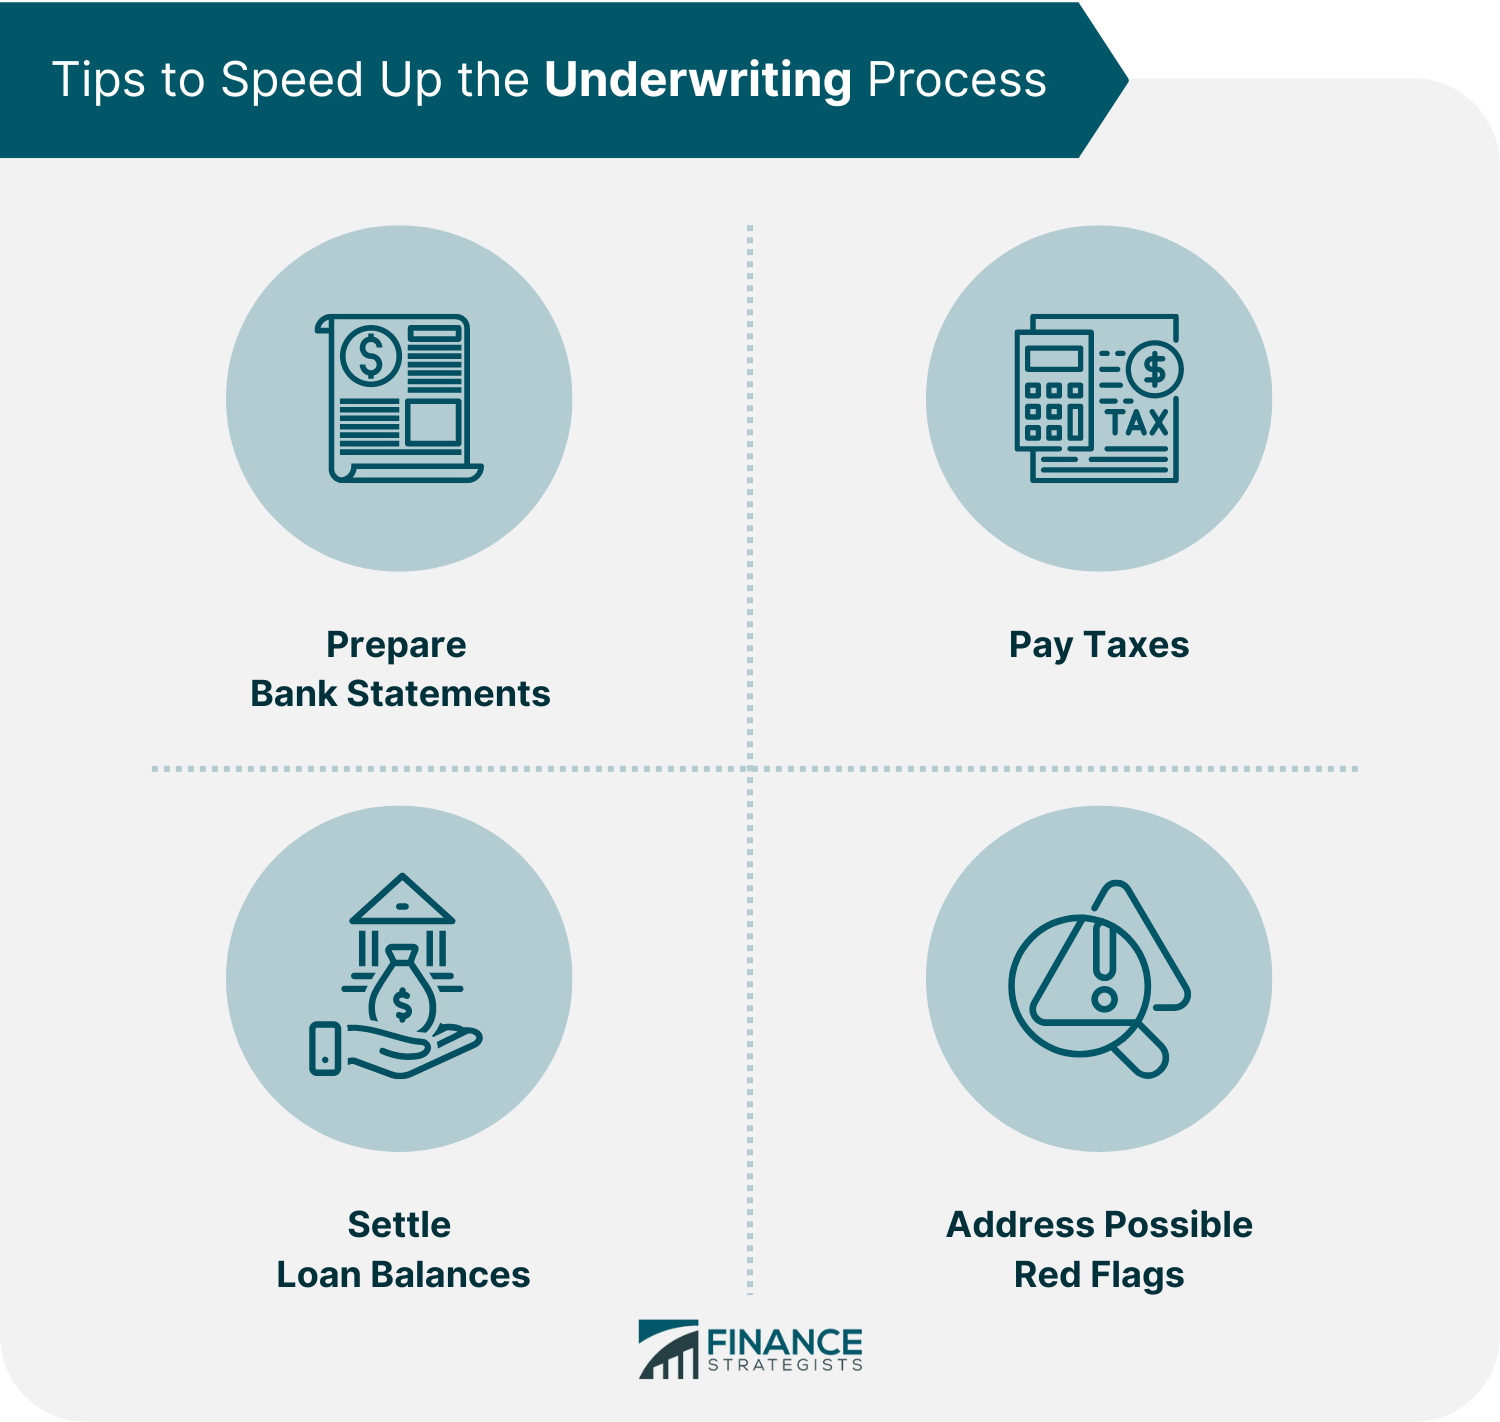 Tips_to_Speed_Up_the_Underwriting_Process